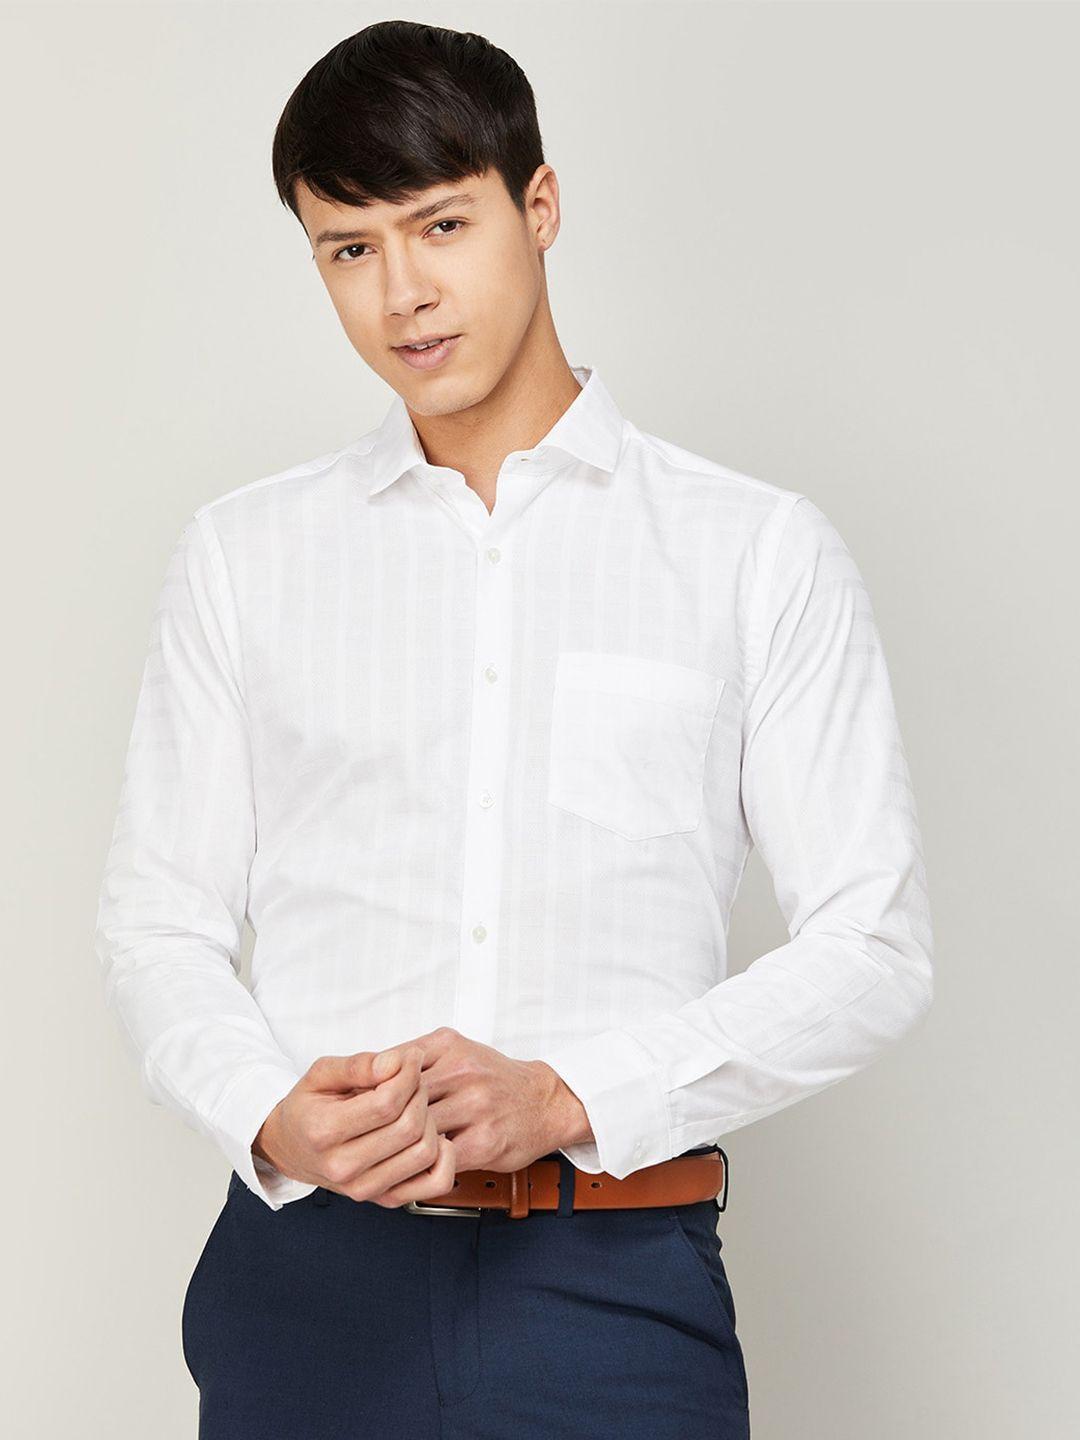 code by lifestyle men striped formal cotton shirt